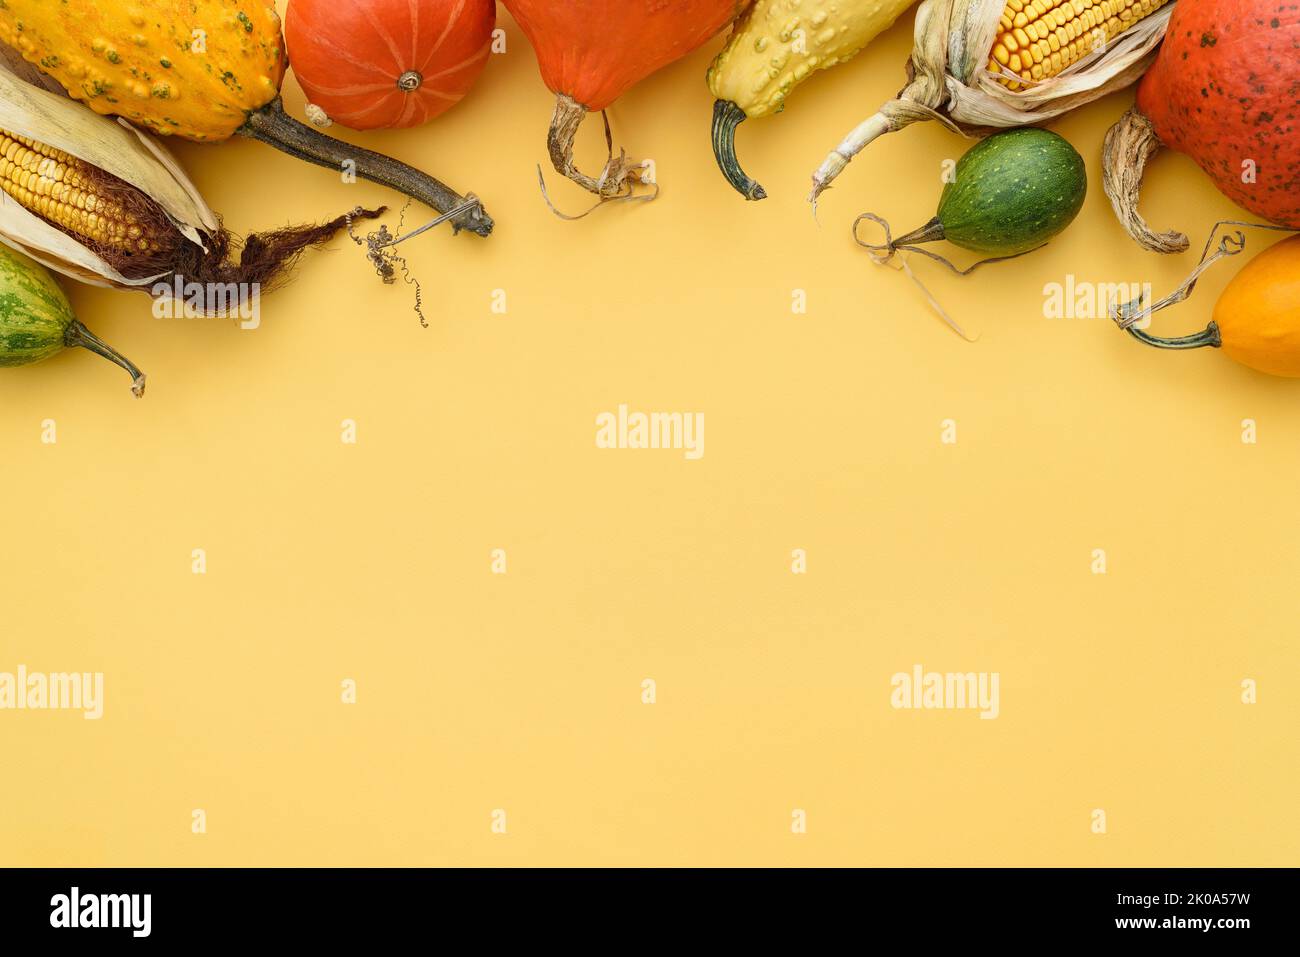 Harvest of winter squash and decorative gourds on yellow background with frame Stock Photo